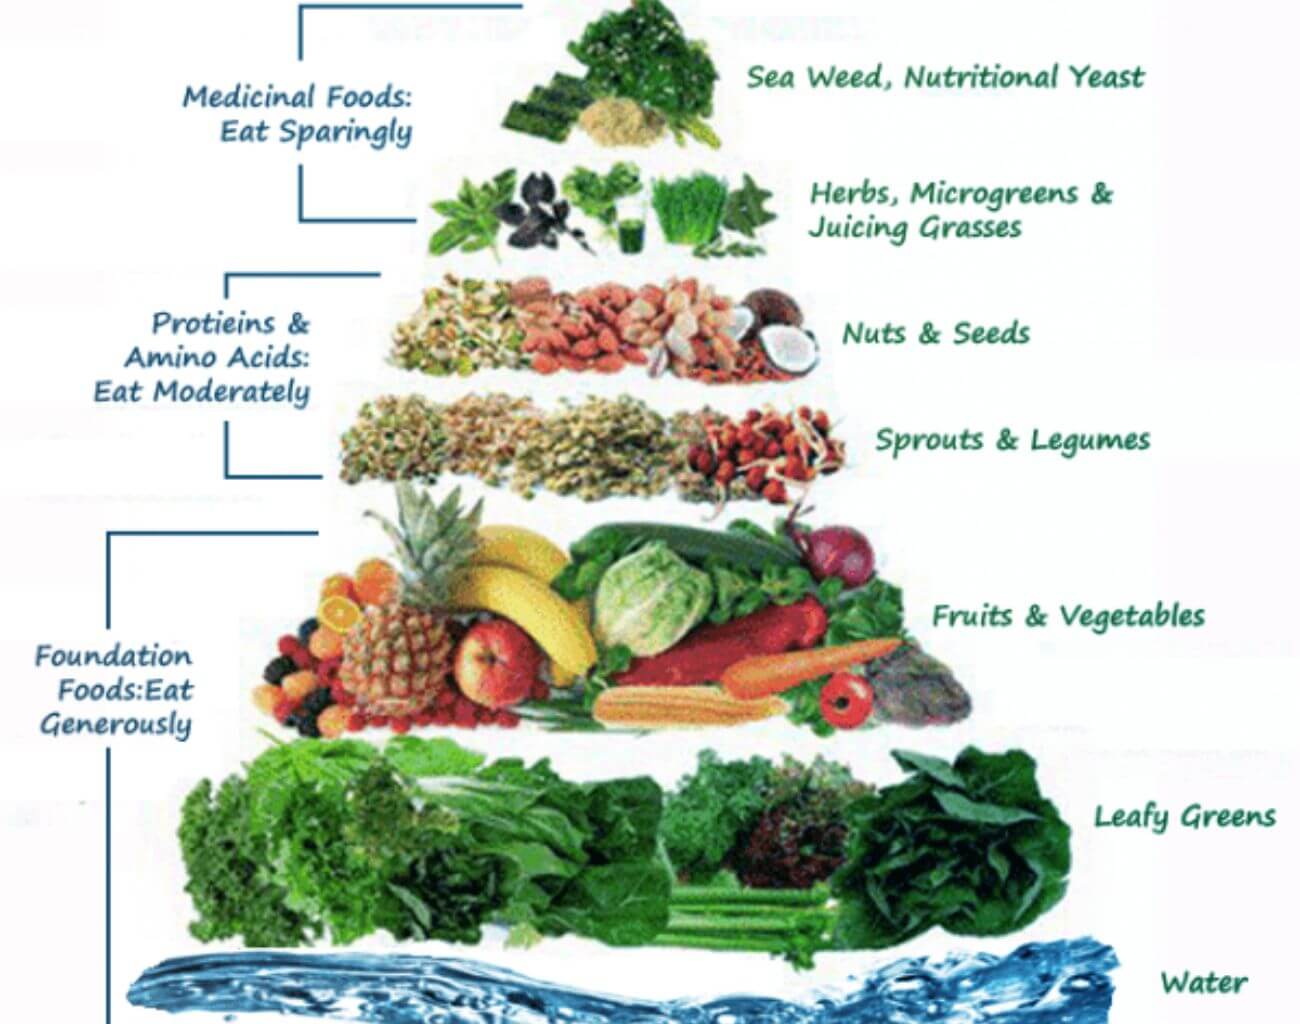 What foods are allowed in the raw vegan diet?